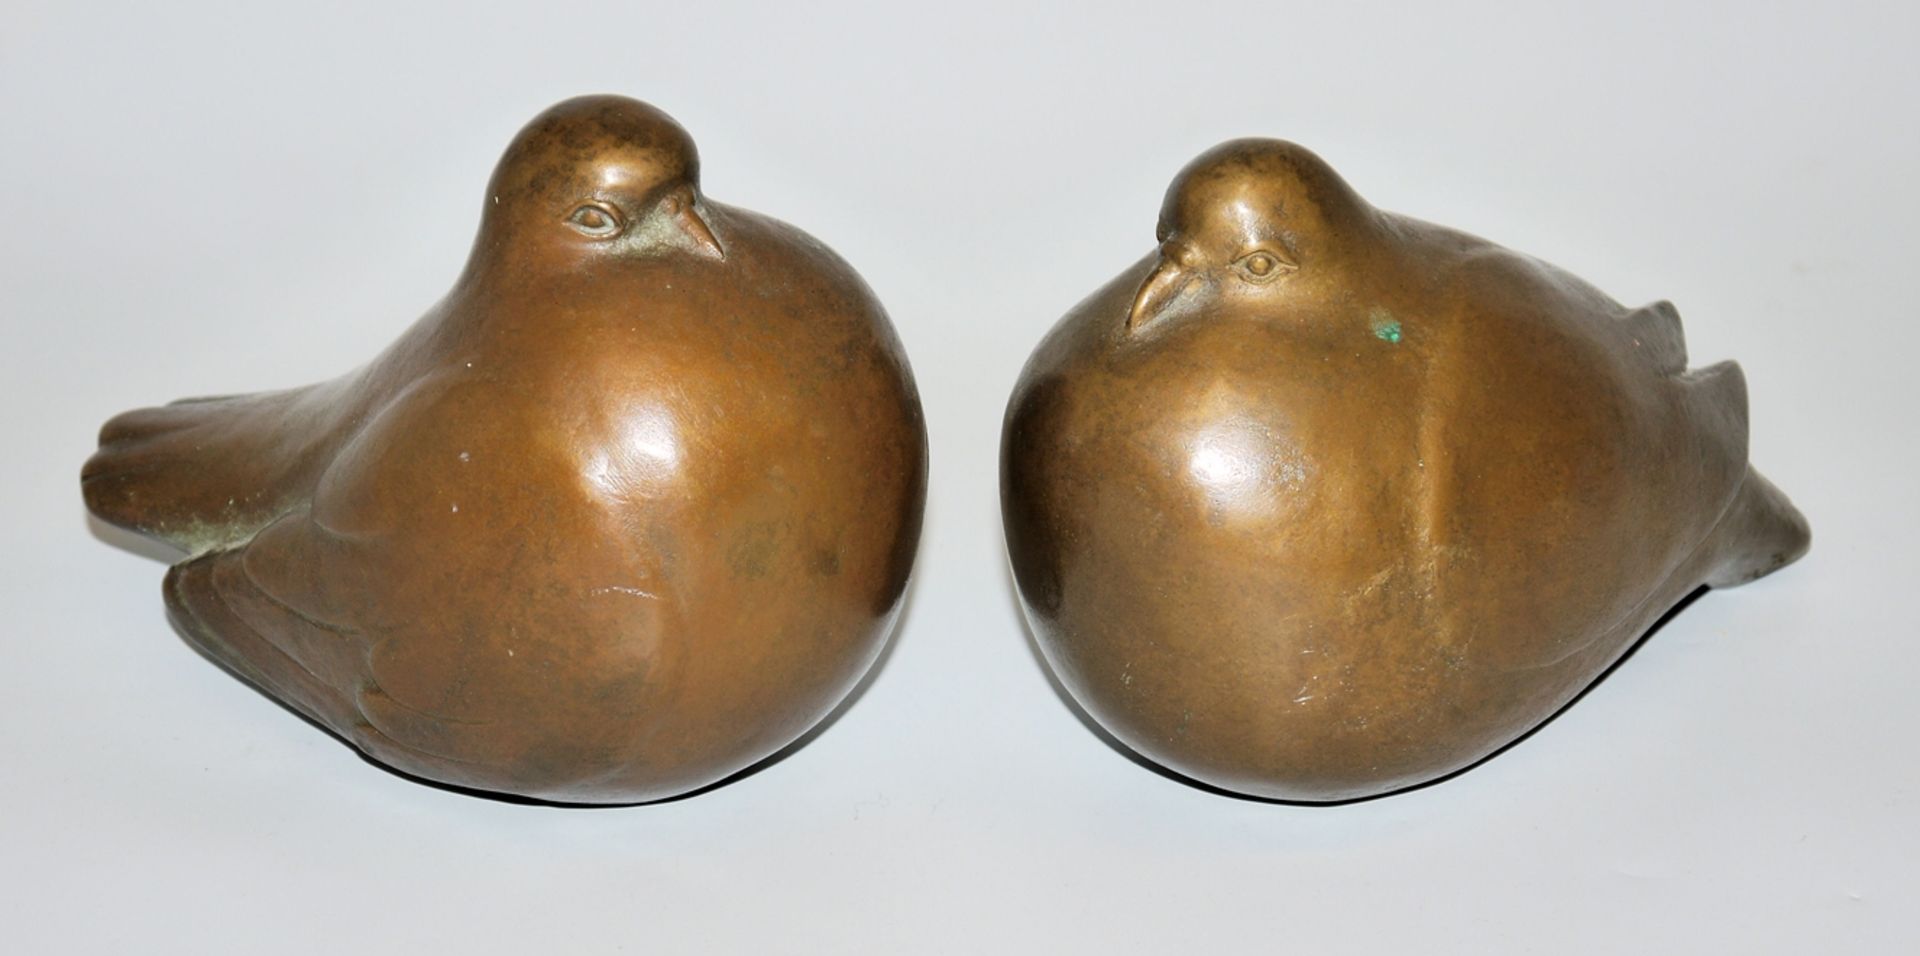 JJ monogrammed, pair of cubic-abstract doves, bronze sculptures c. 1950/60